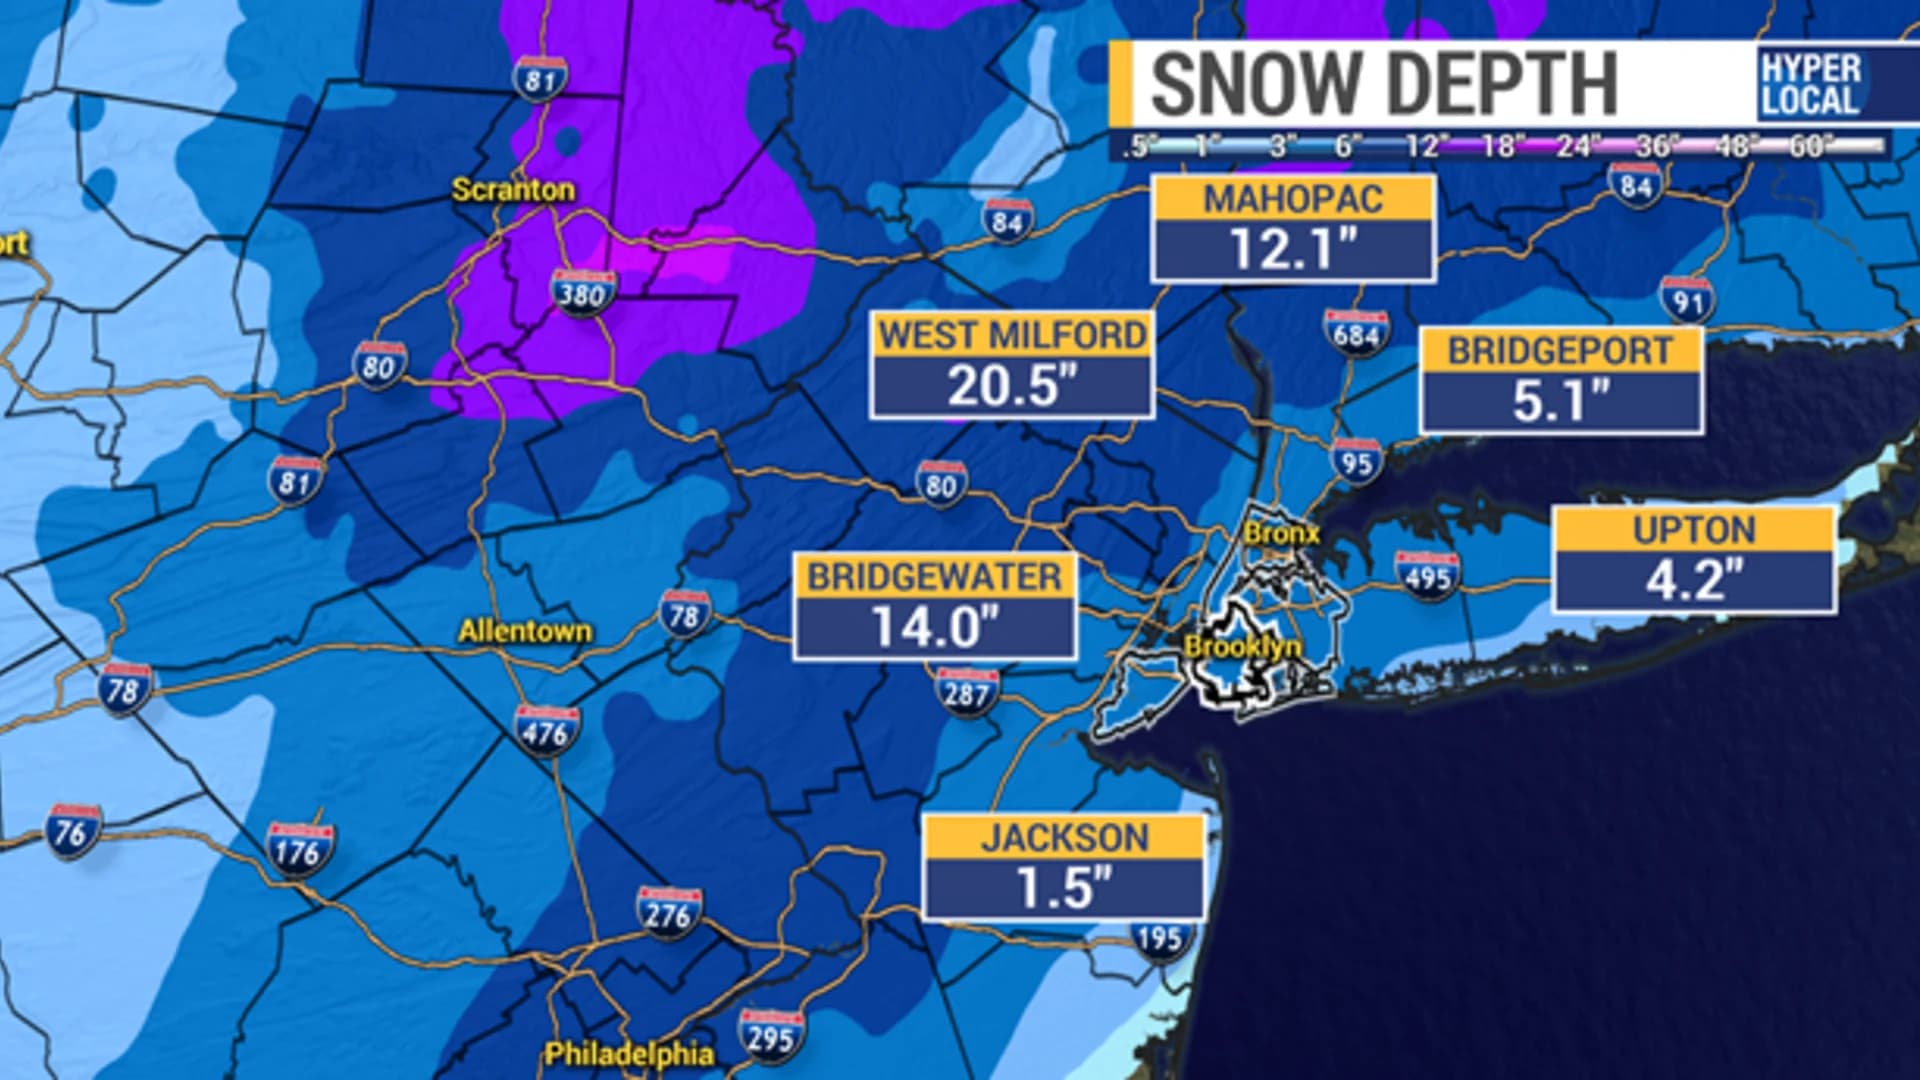 Nor'easter snowfall totals